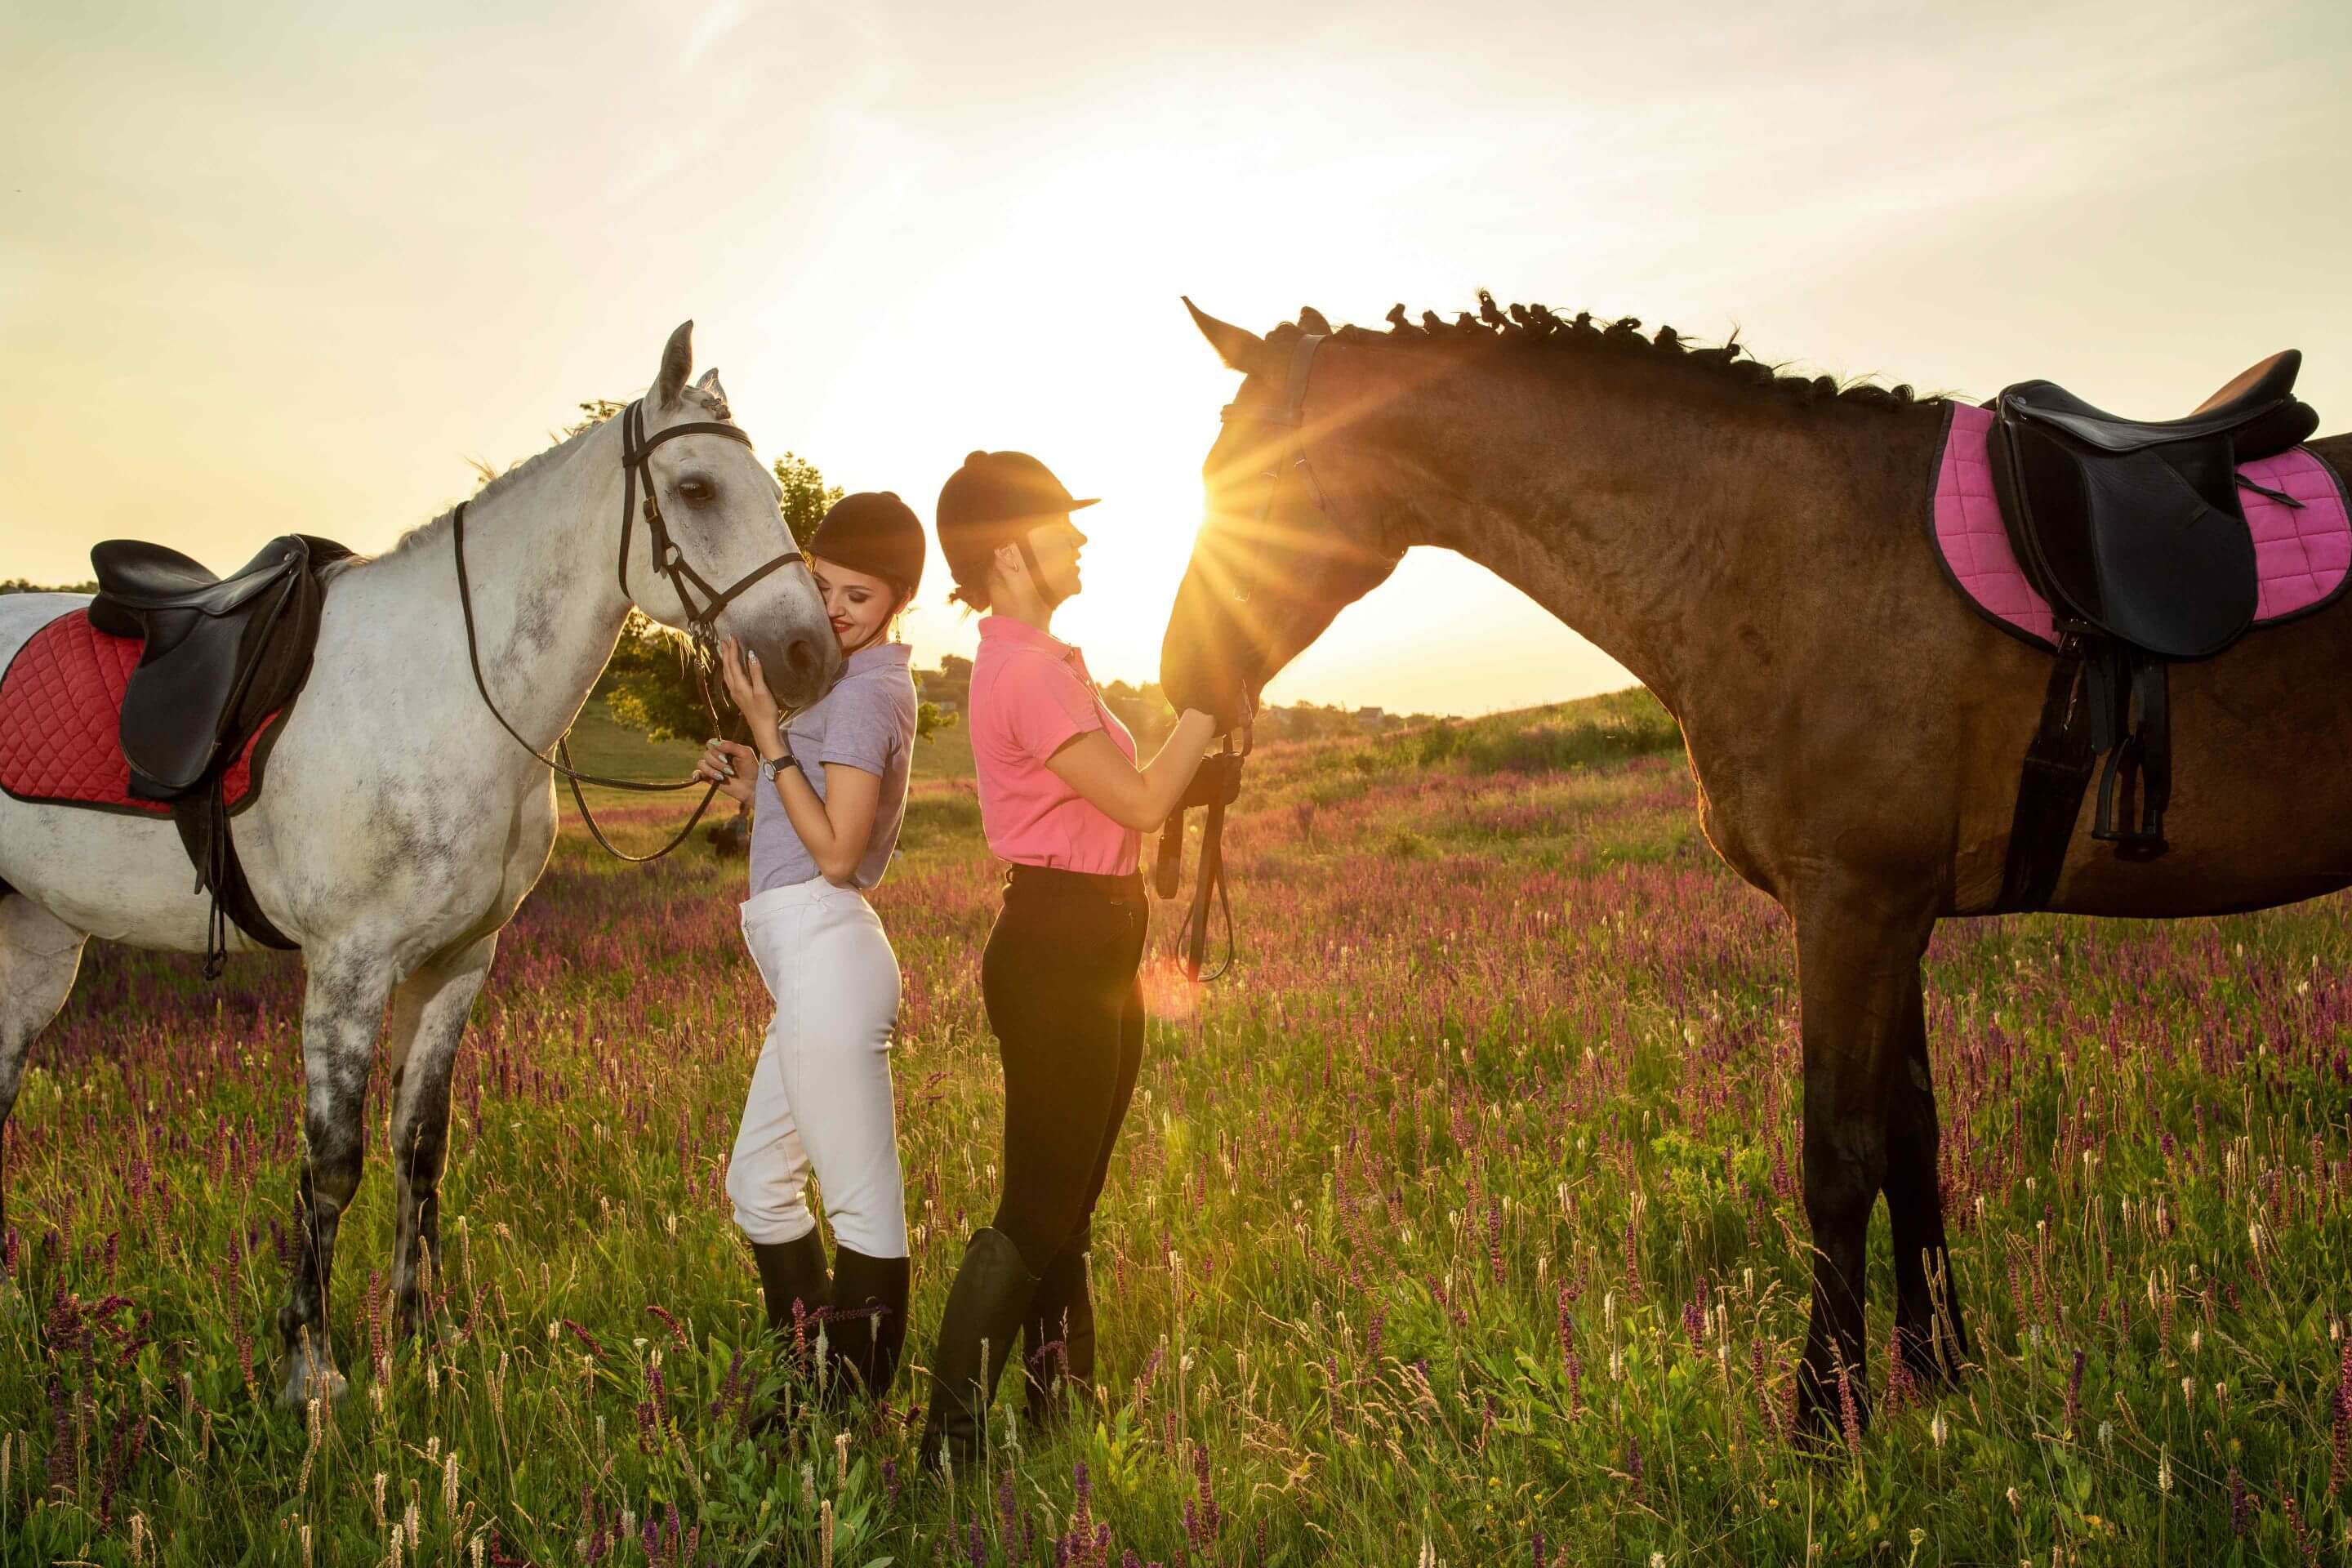 557-two-woman-two-horses-outdoor-summer-happy-sunset-together-nature.jpg